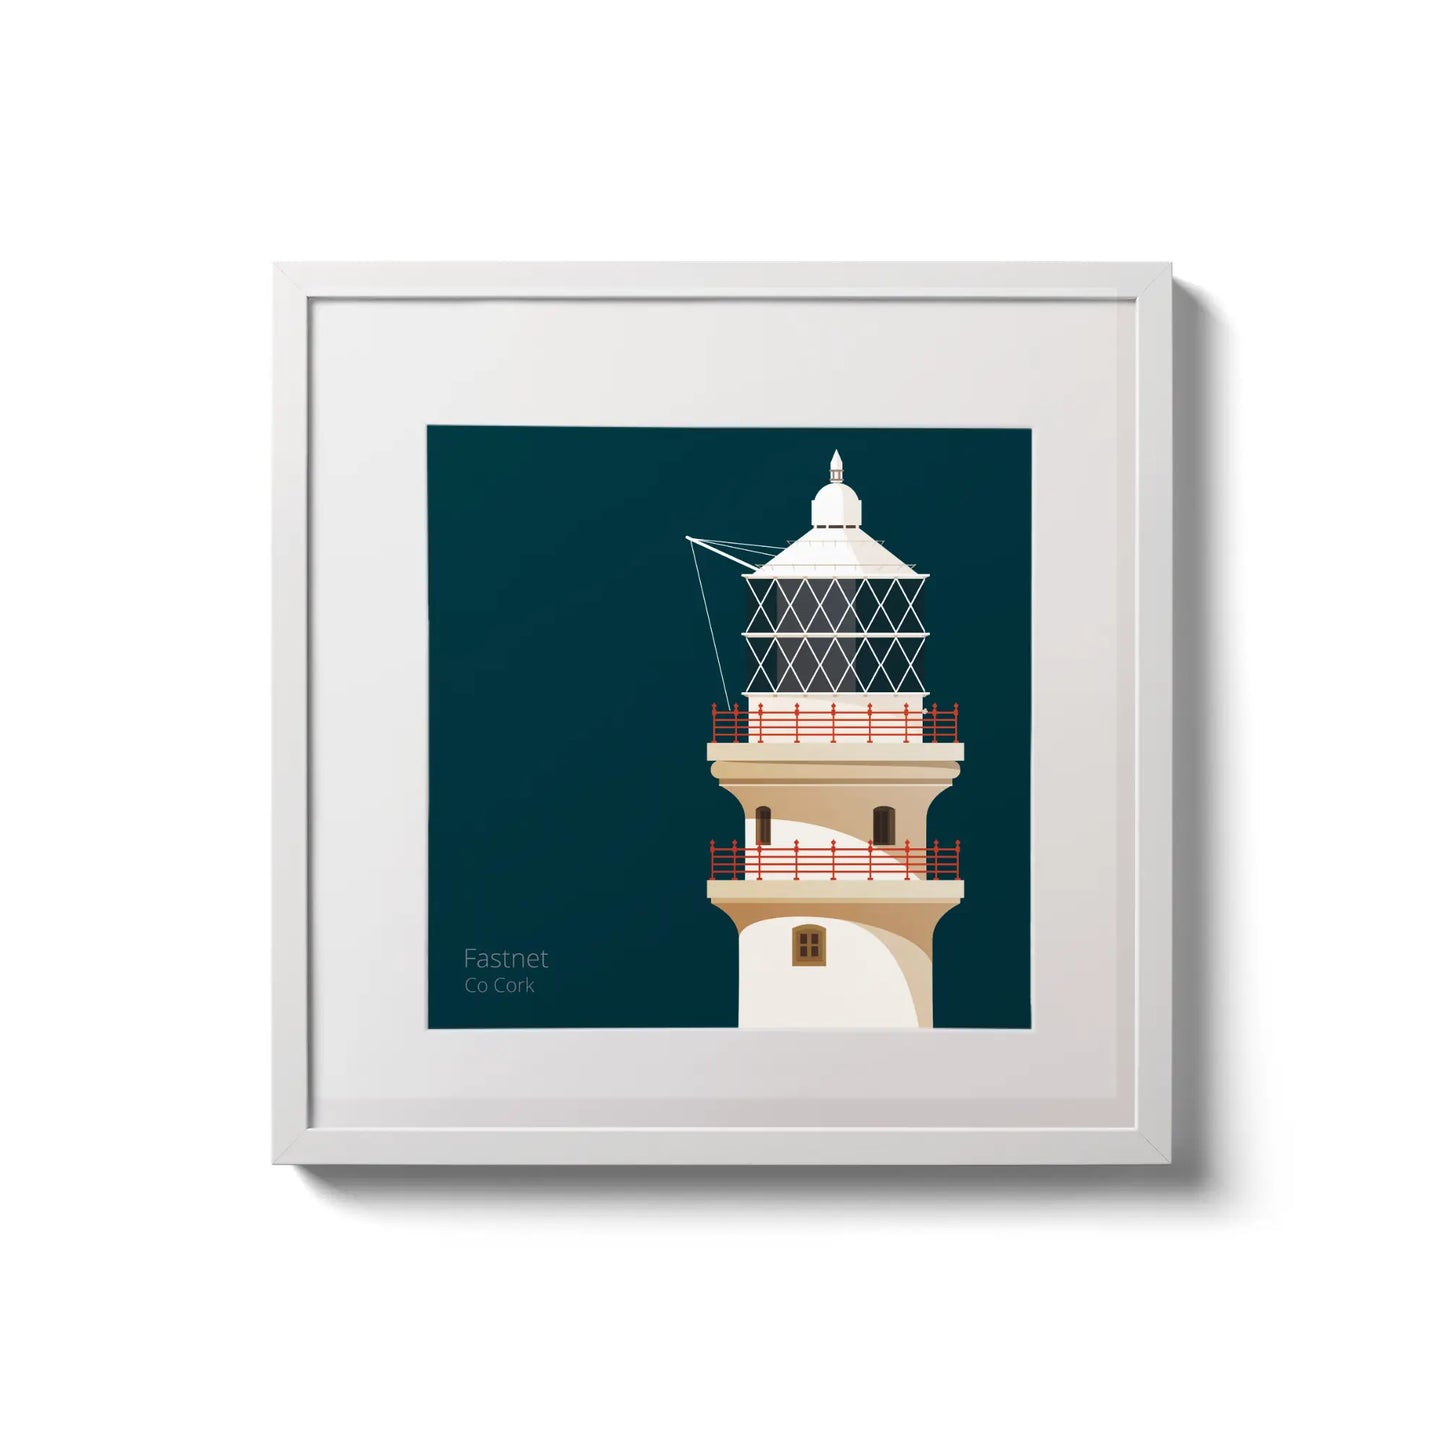 Illustration of Fastnet lighthouse on a midnight blue background,  in a white square frame measuring 20x20cm.